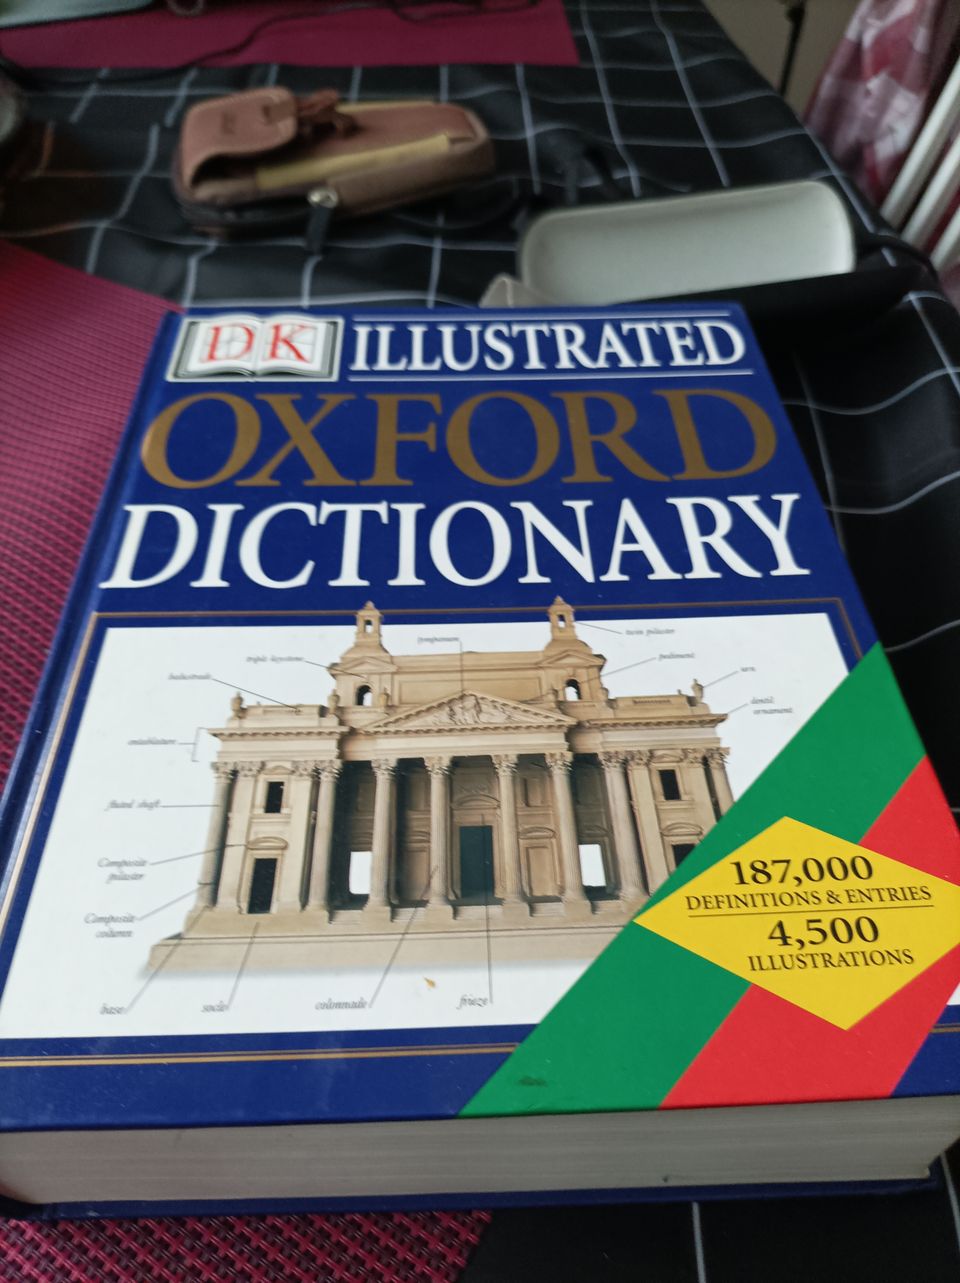 English lexicon. 1000 pages from 1998. Before google 🤔